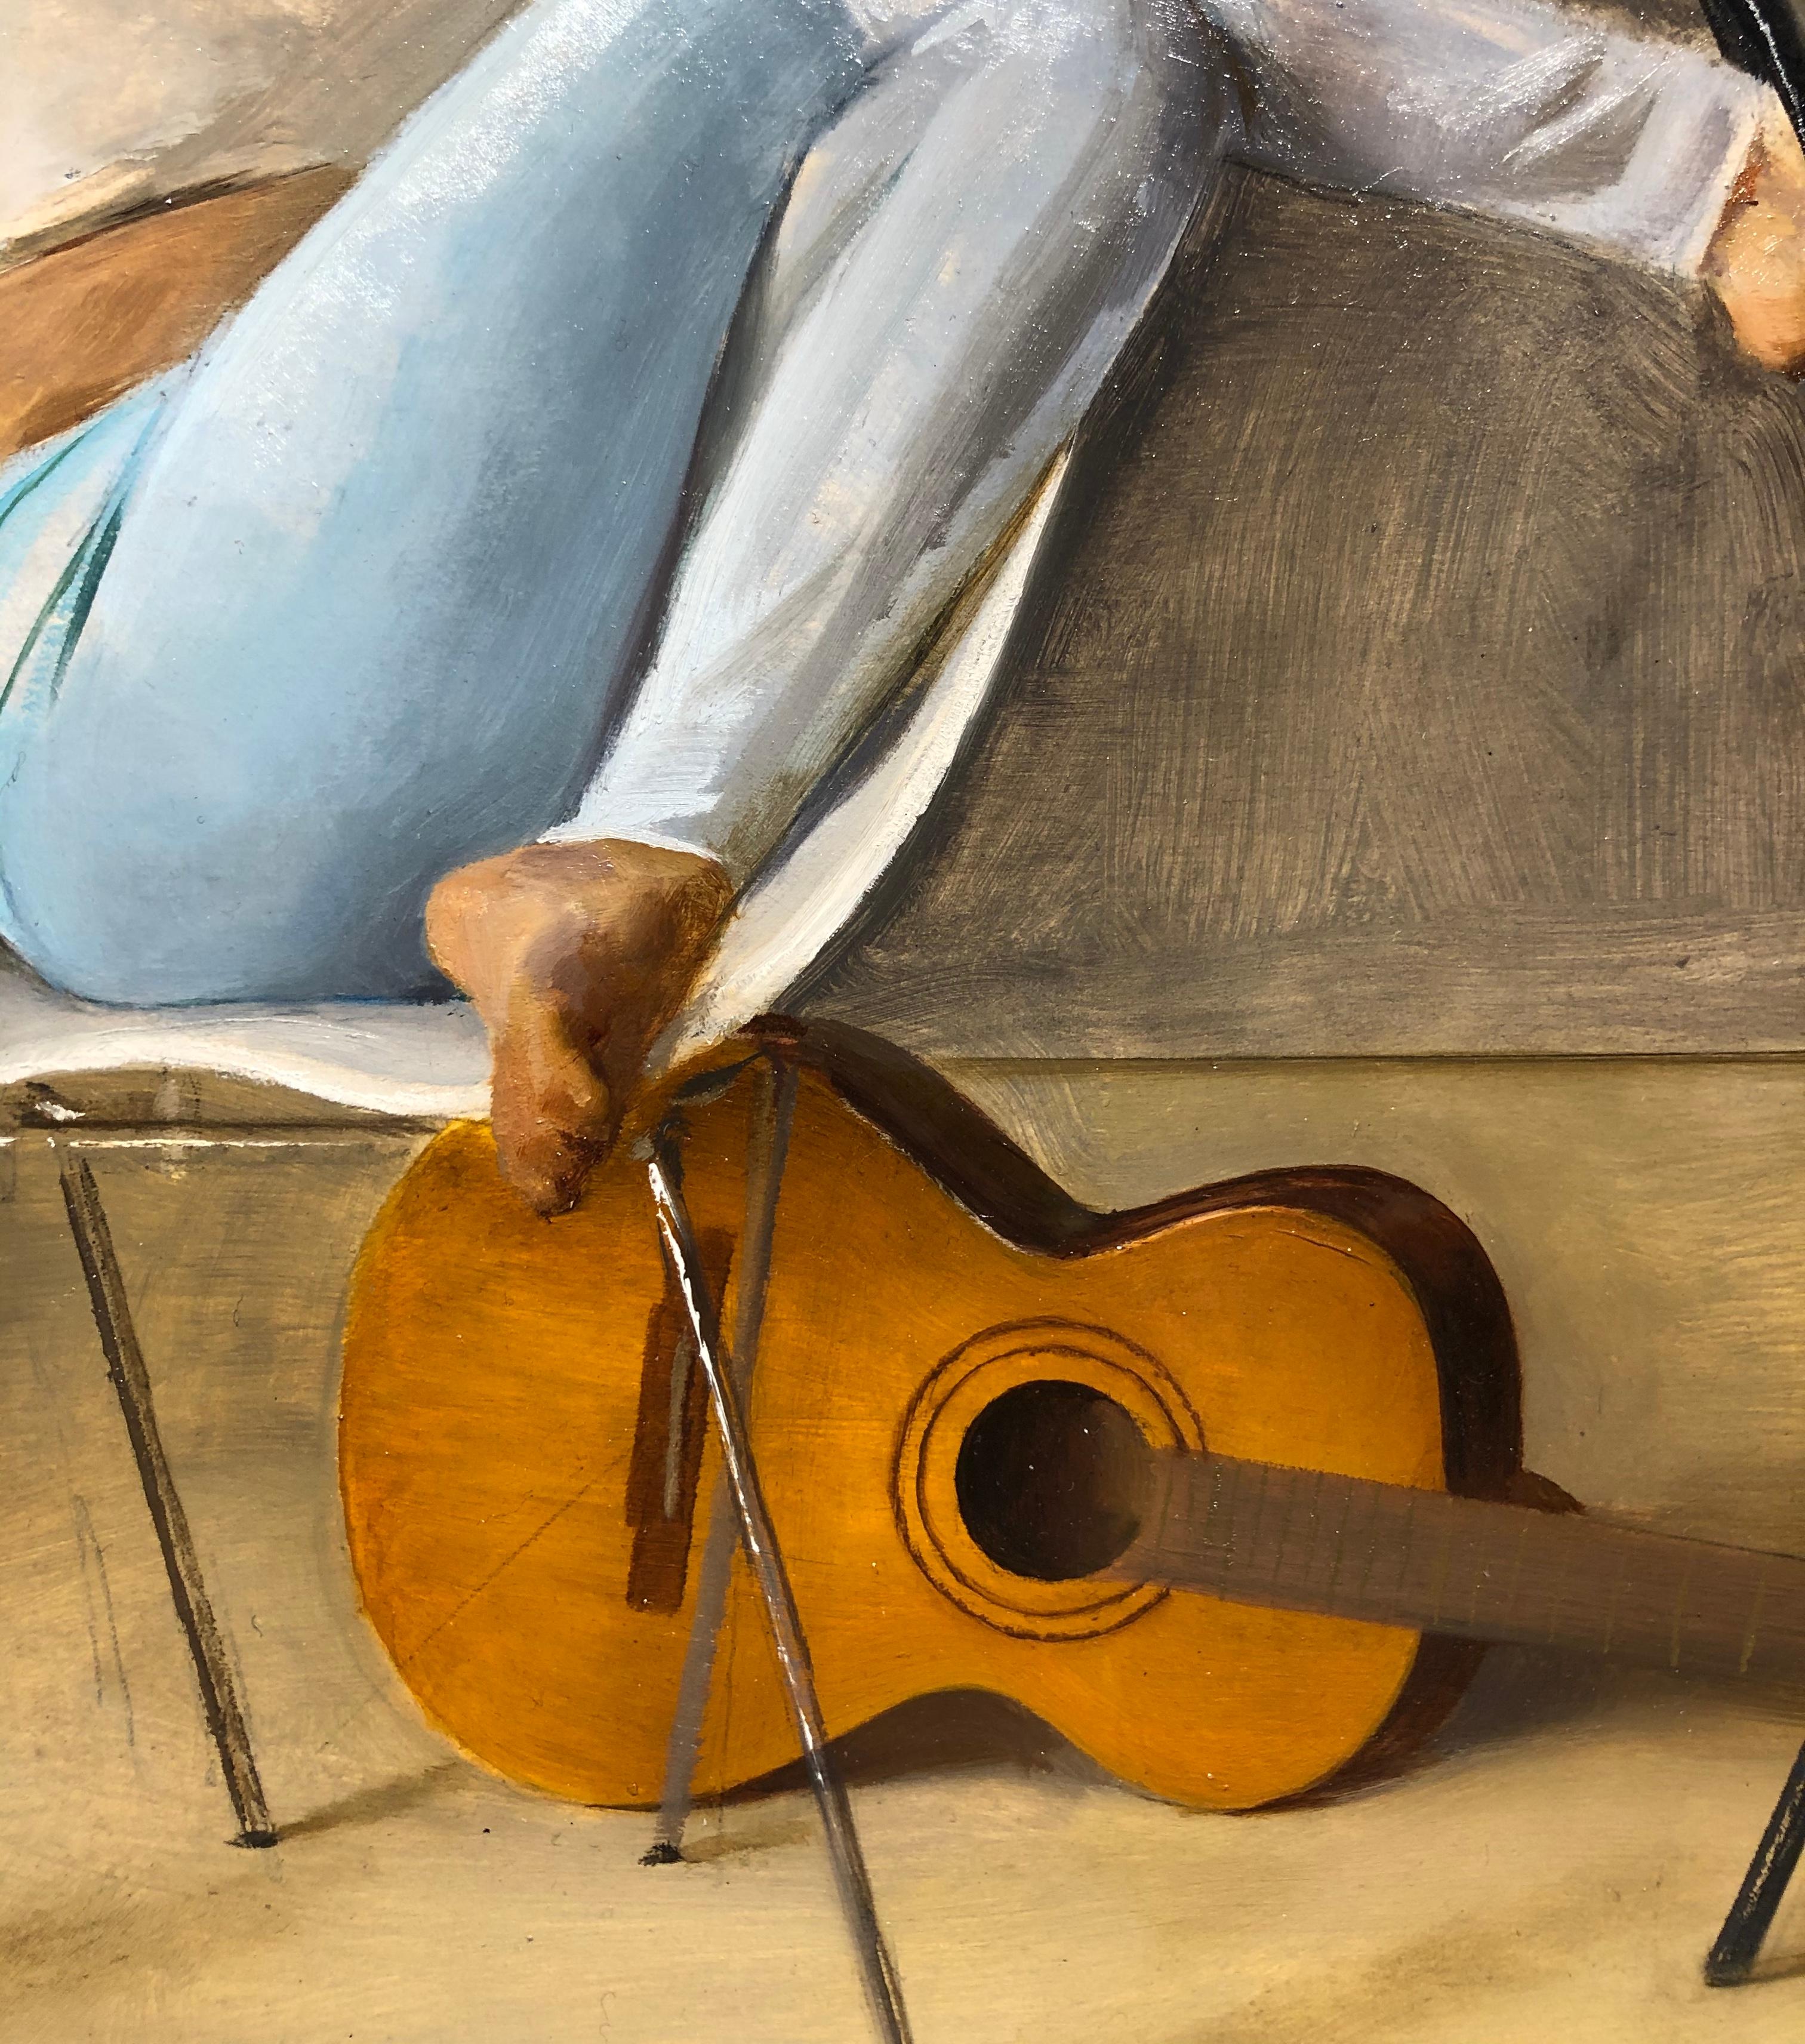 Ashley with Guitar, Female Lounging on a Tom Vac Chair, Original Oil on Panel - Contemporary Painting by Andrew S. Conklin